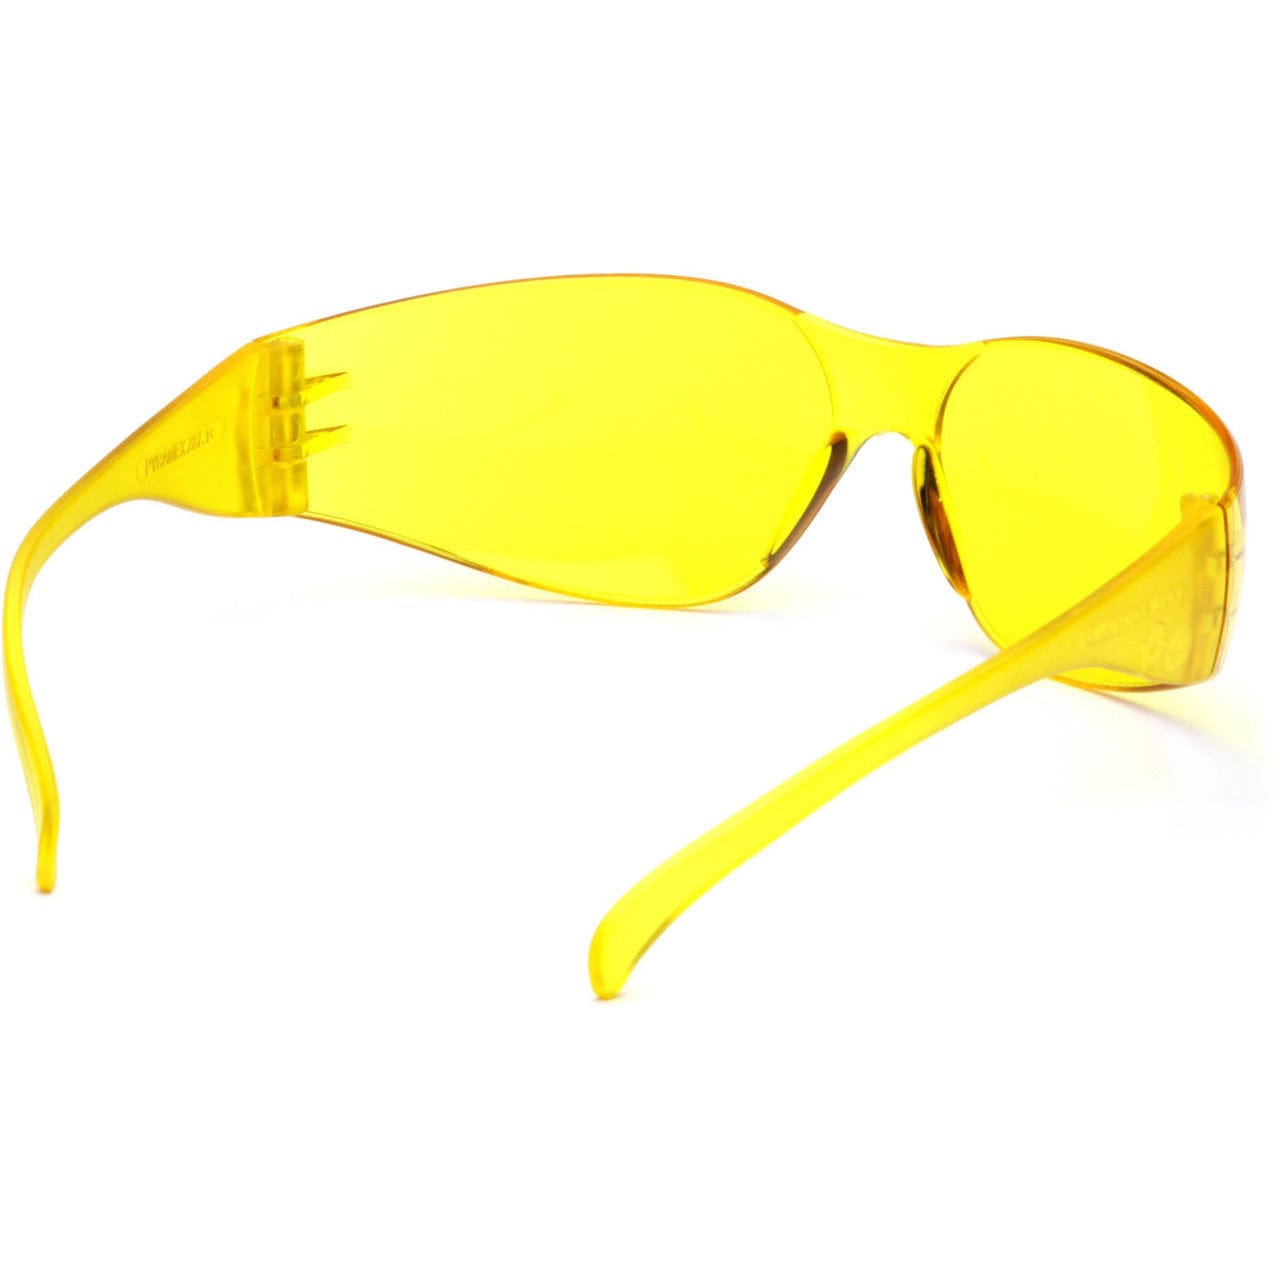 Pyramex Intruder Safety Glasses with Amber Lens S4130S Inside View